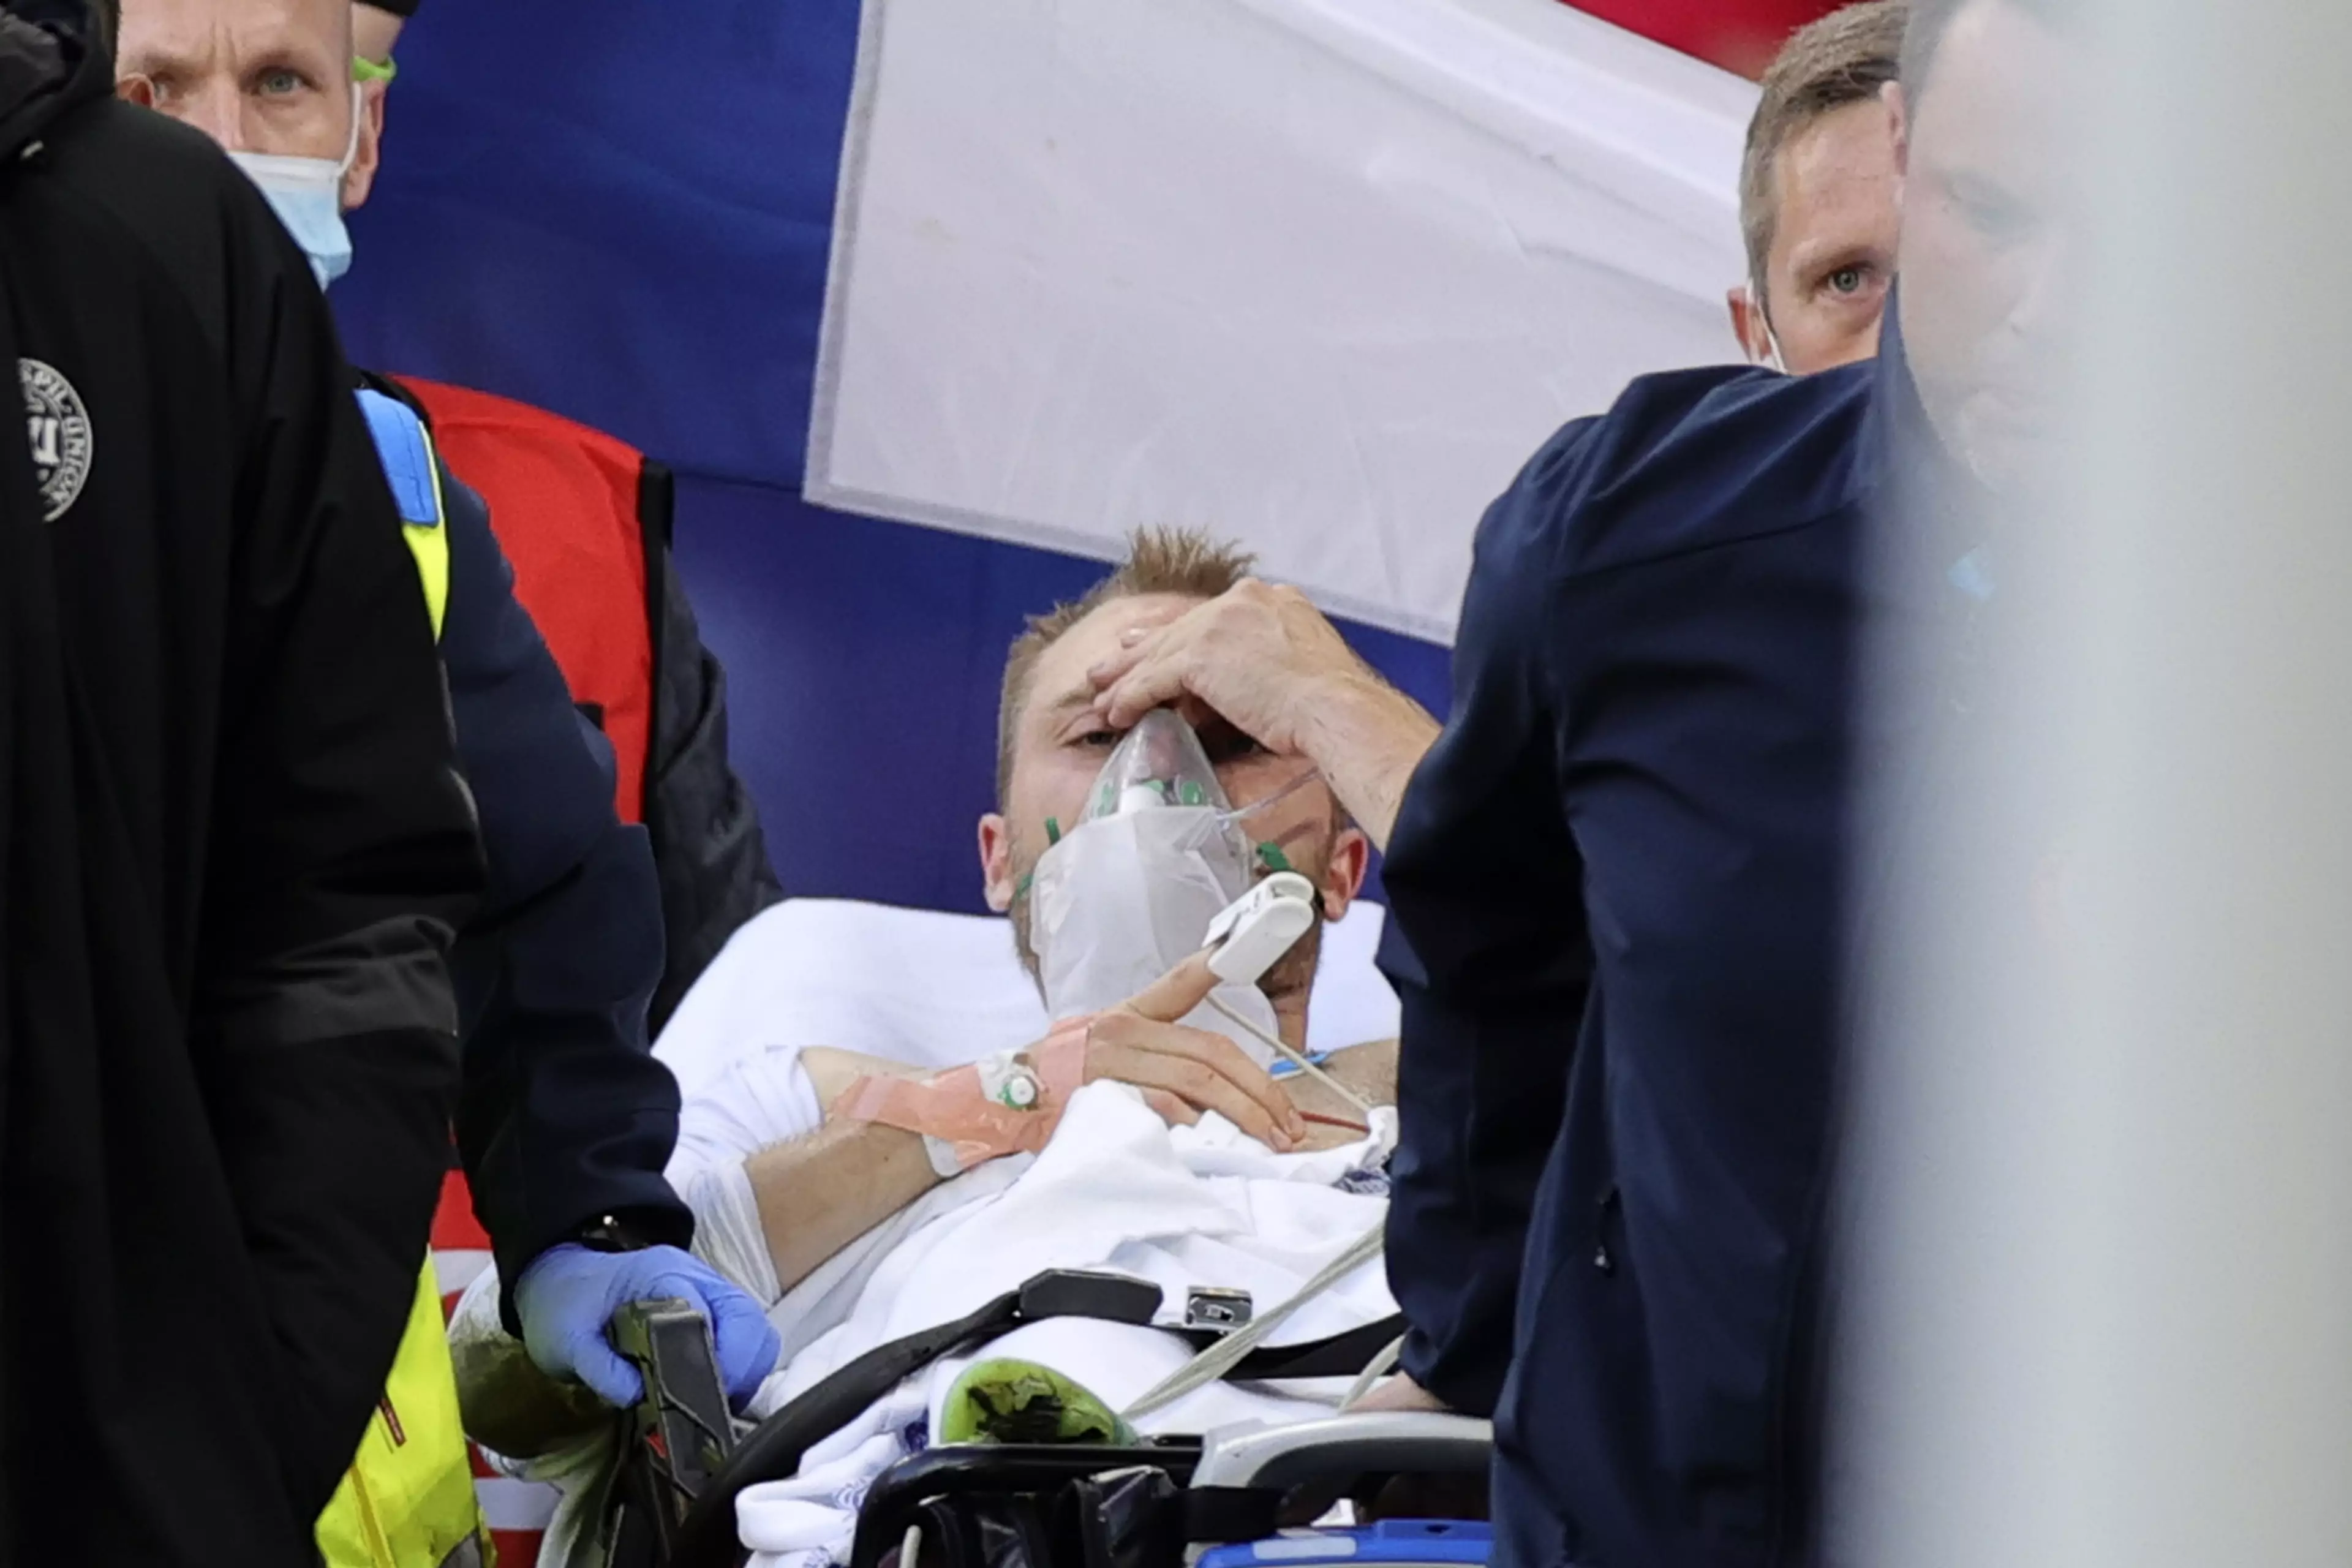 Christian Eriksen is in a 'stable' condition in a Copenhagen hospital, Denmark's soccer federation said